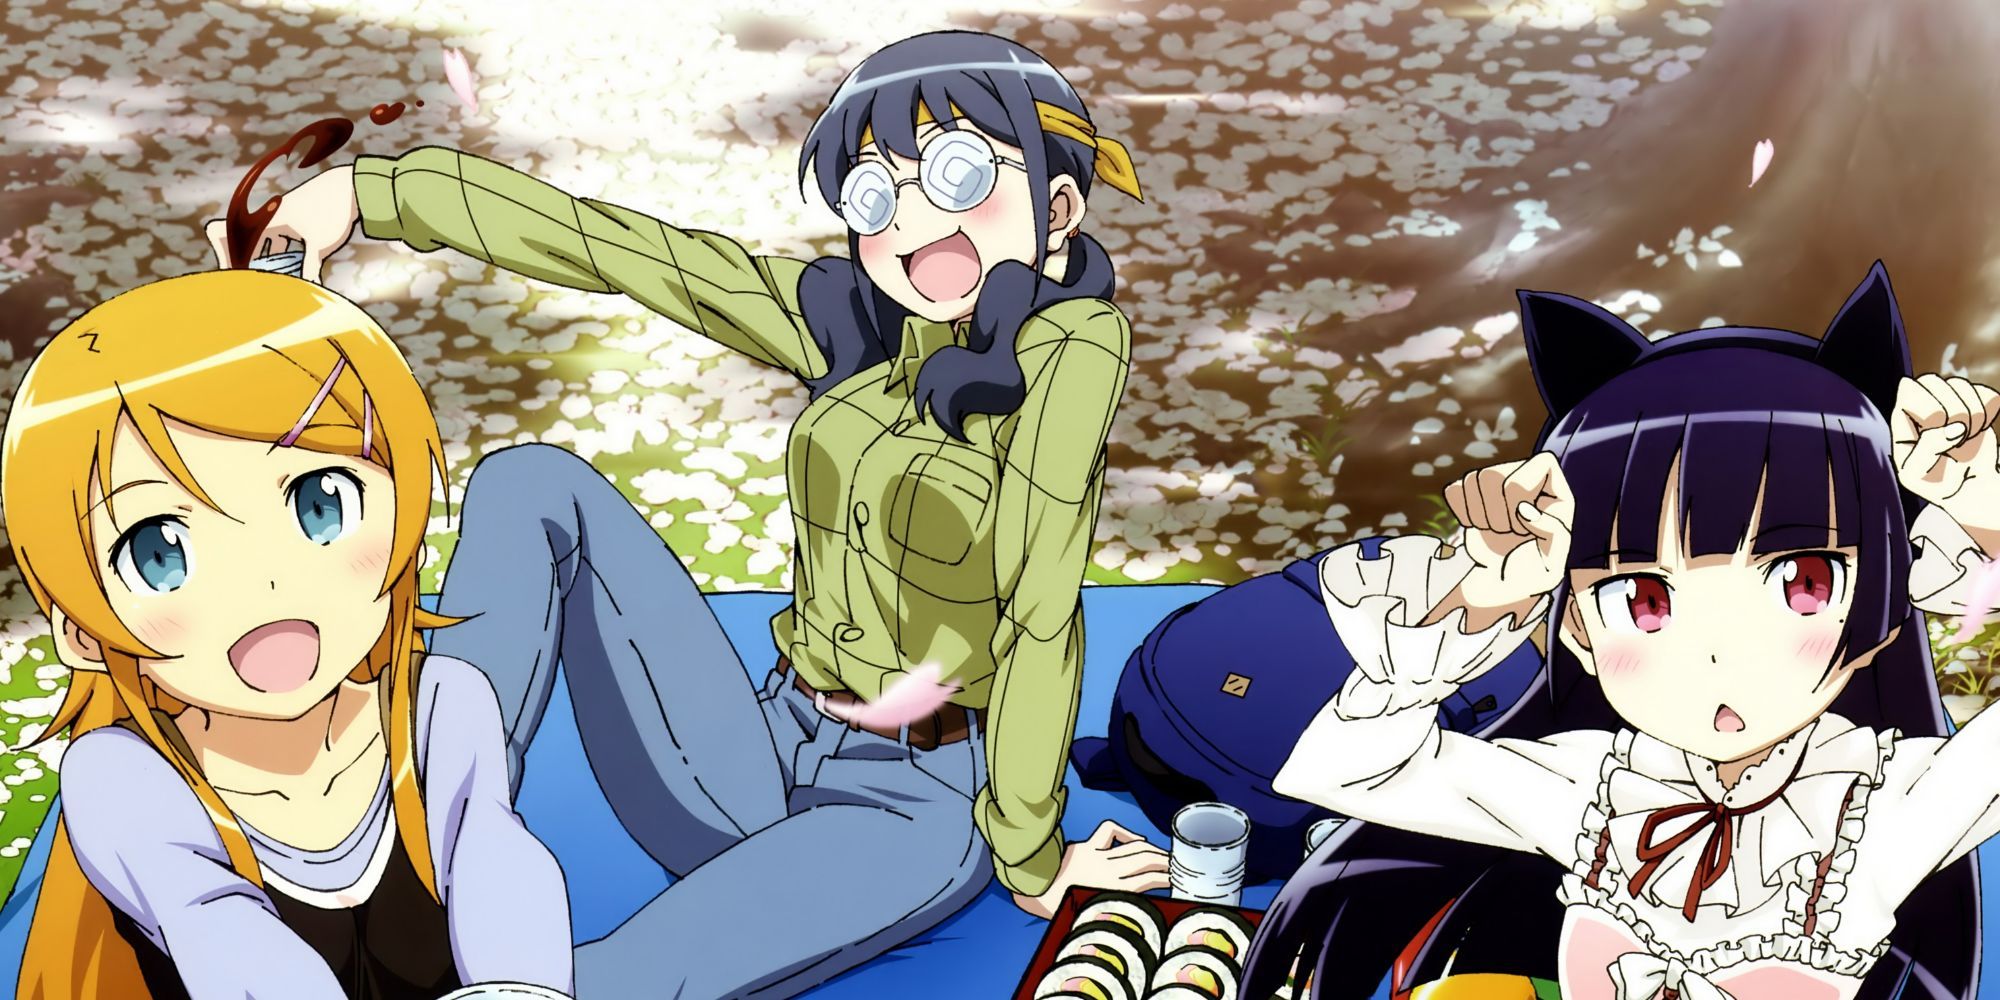 Three characters from Oreimo hanging out on a picnic blanket